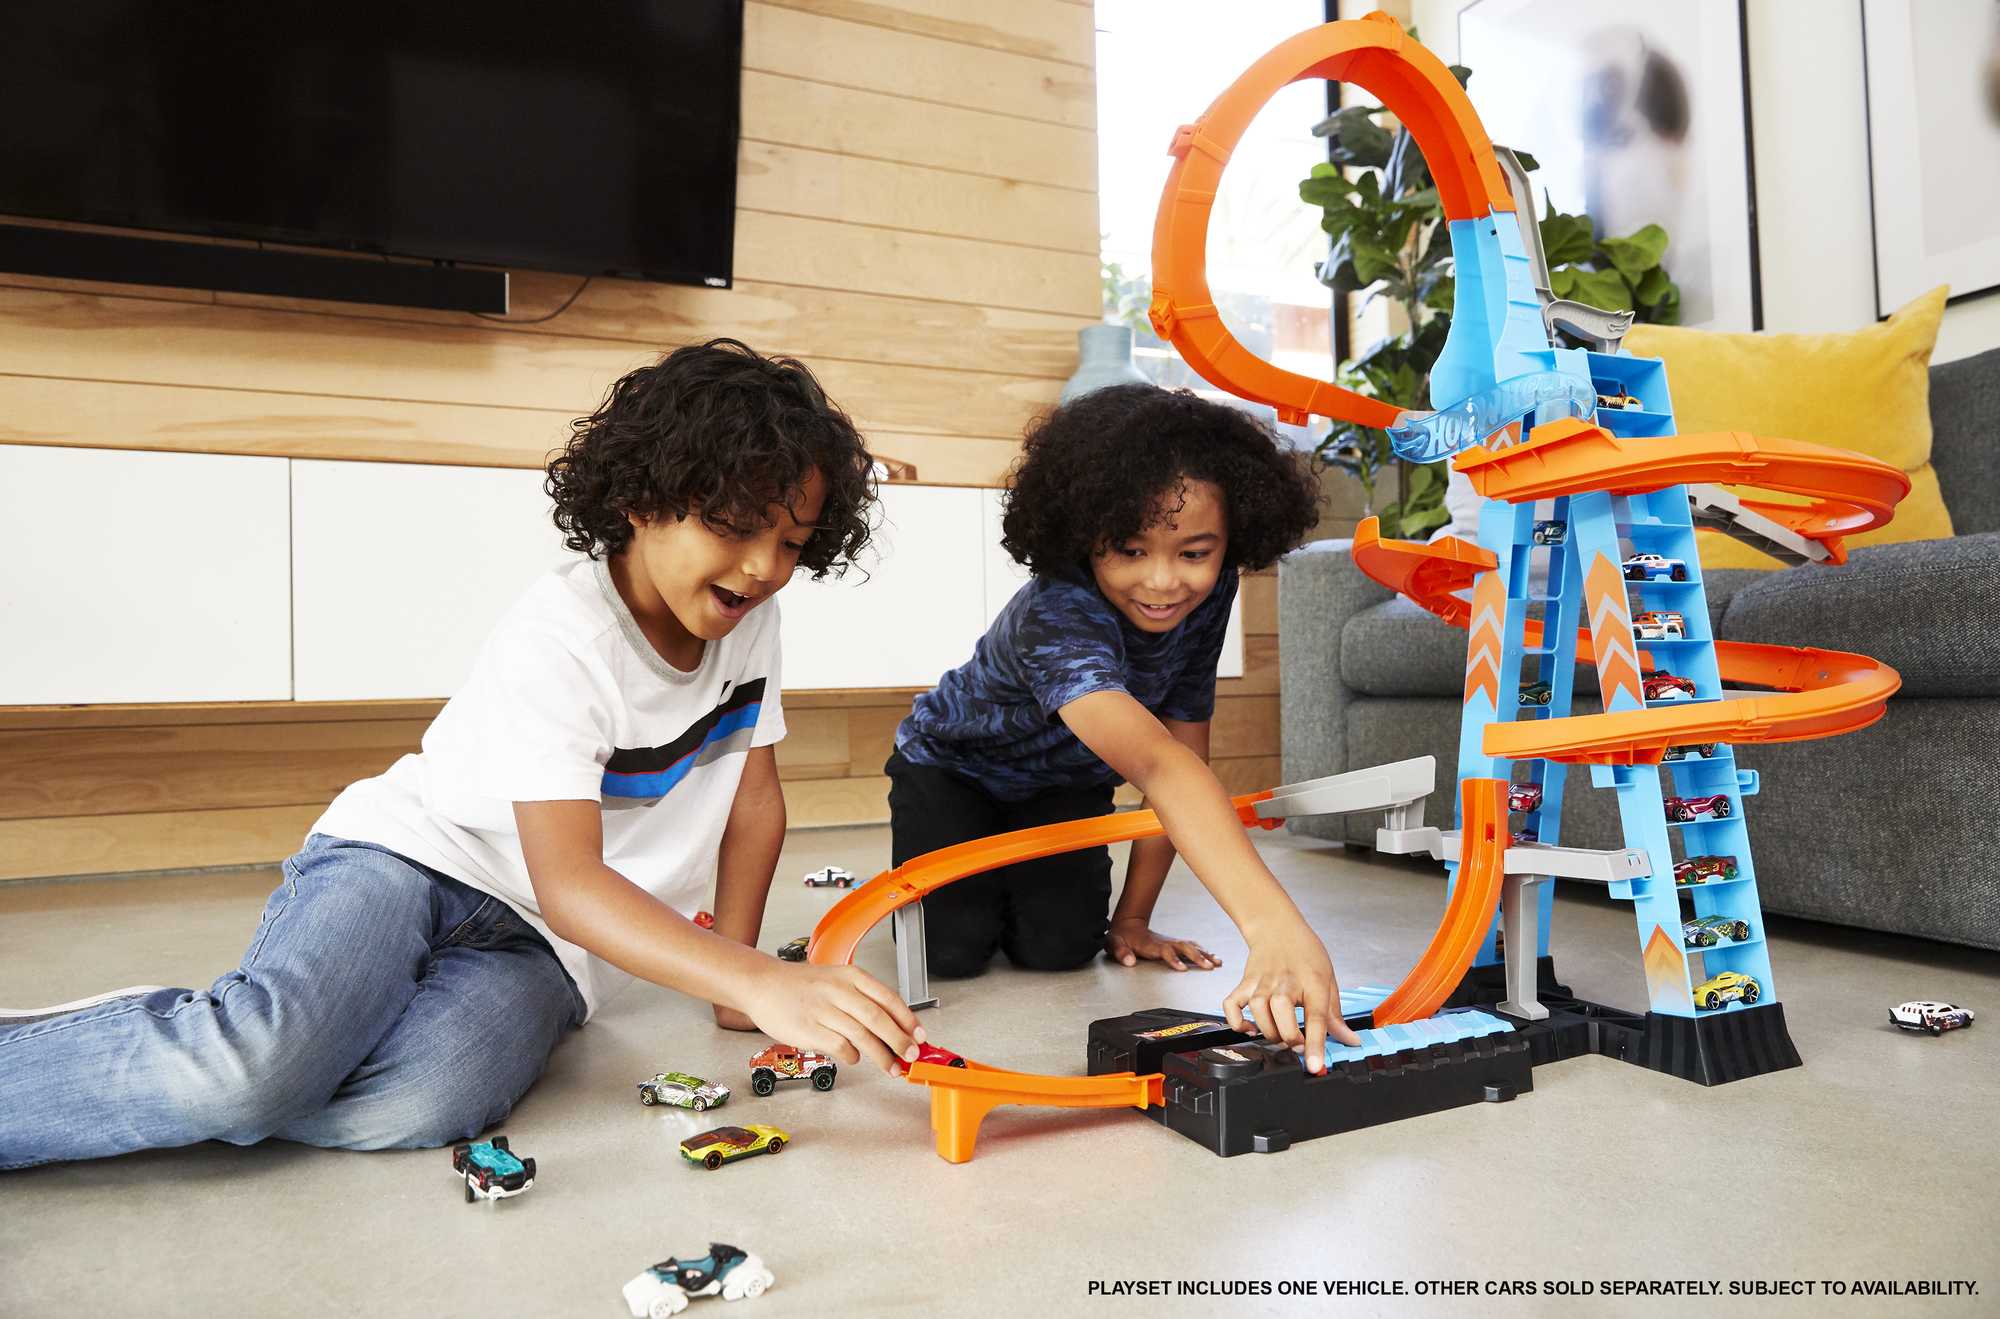 Hot Wheels Sky Crash Tower Motorized Track Set with Toy Car, Stores 20+ 1:64 Scale Cars, for Kids 5-10 years old - image 4 of 8